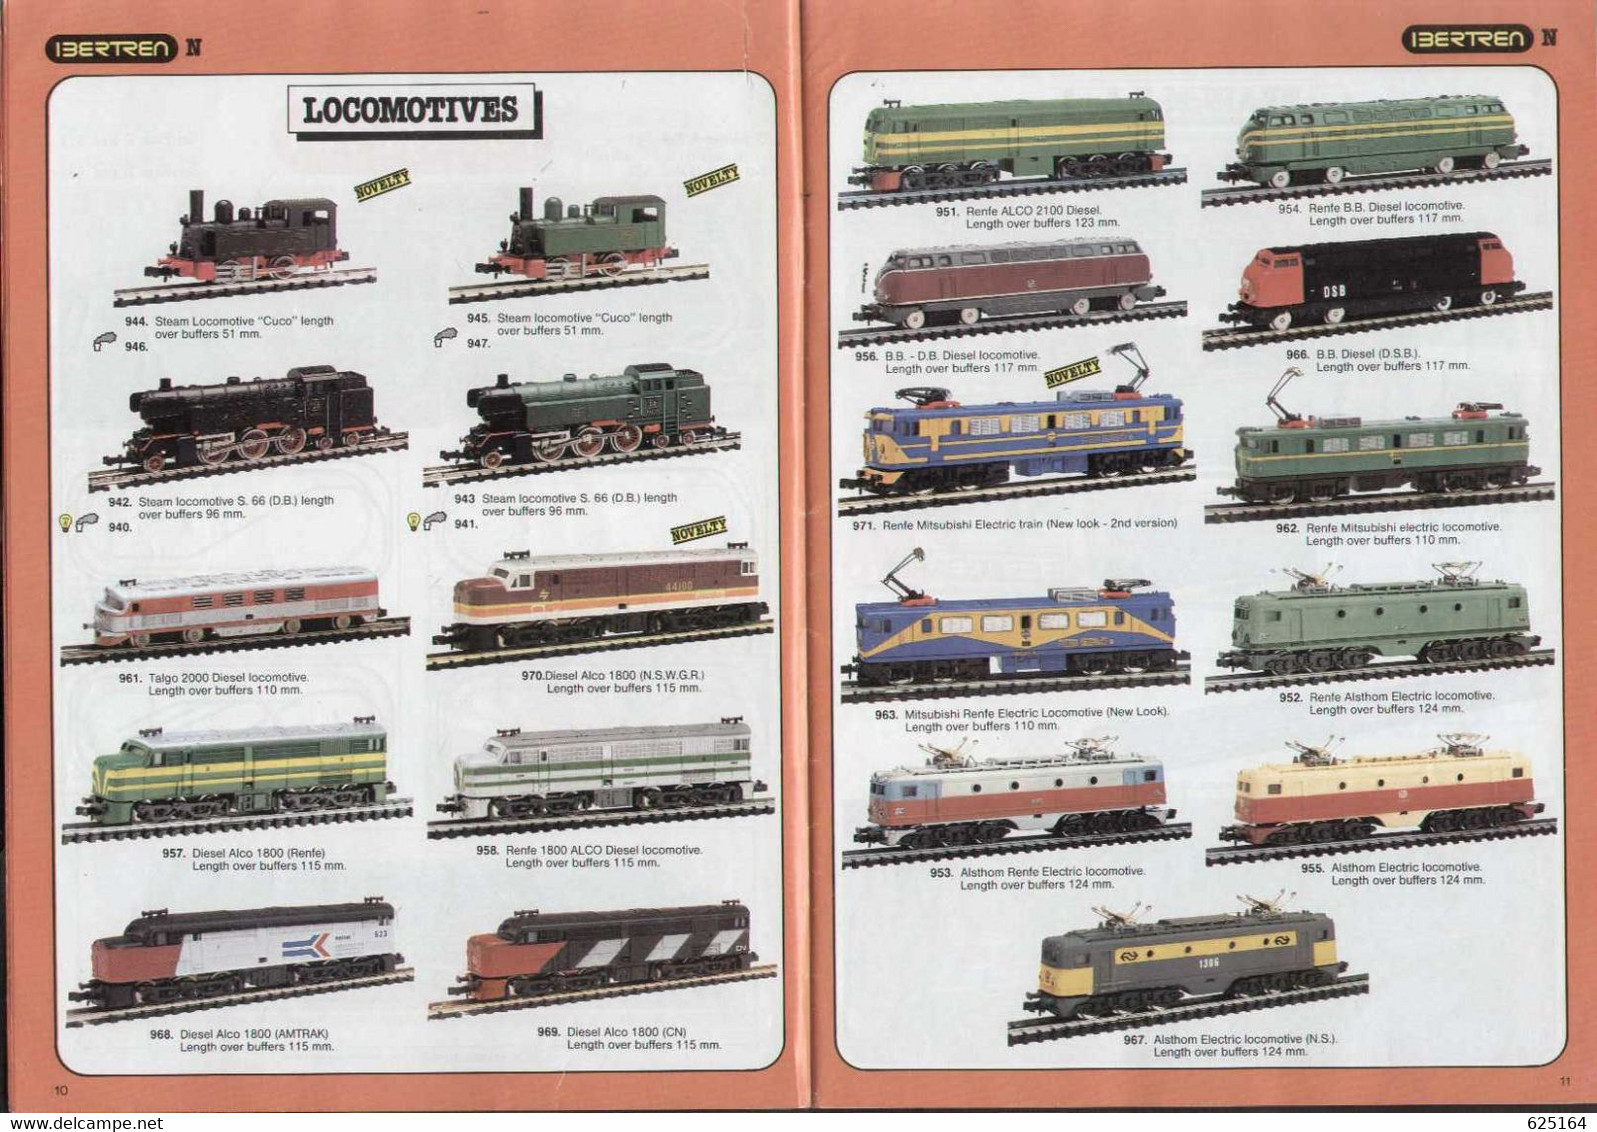 Catalogue IBERTREN 1985  N Scale (1:160) & HO Scale (1:87) English Edition - English